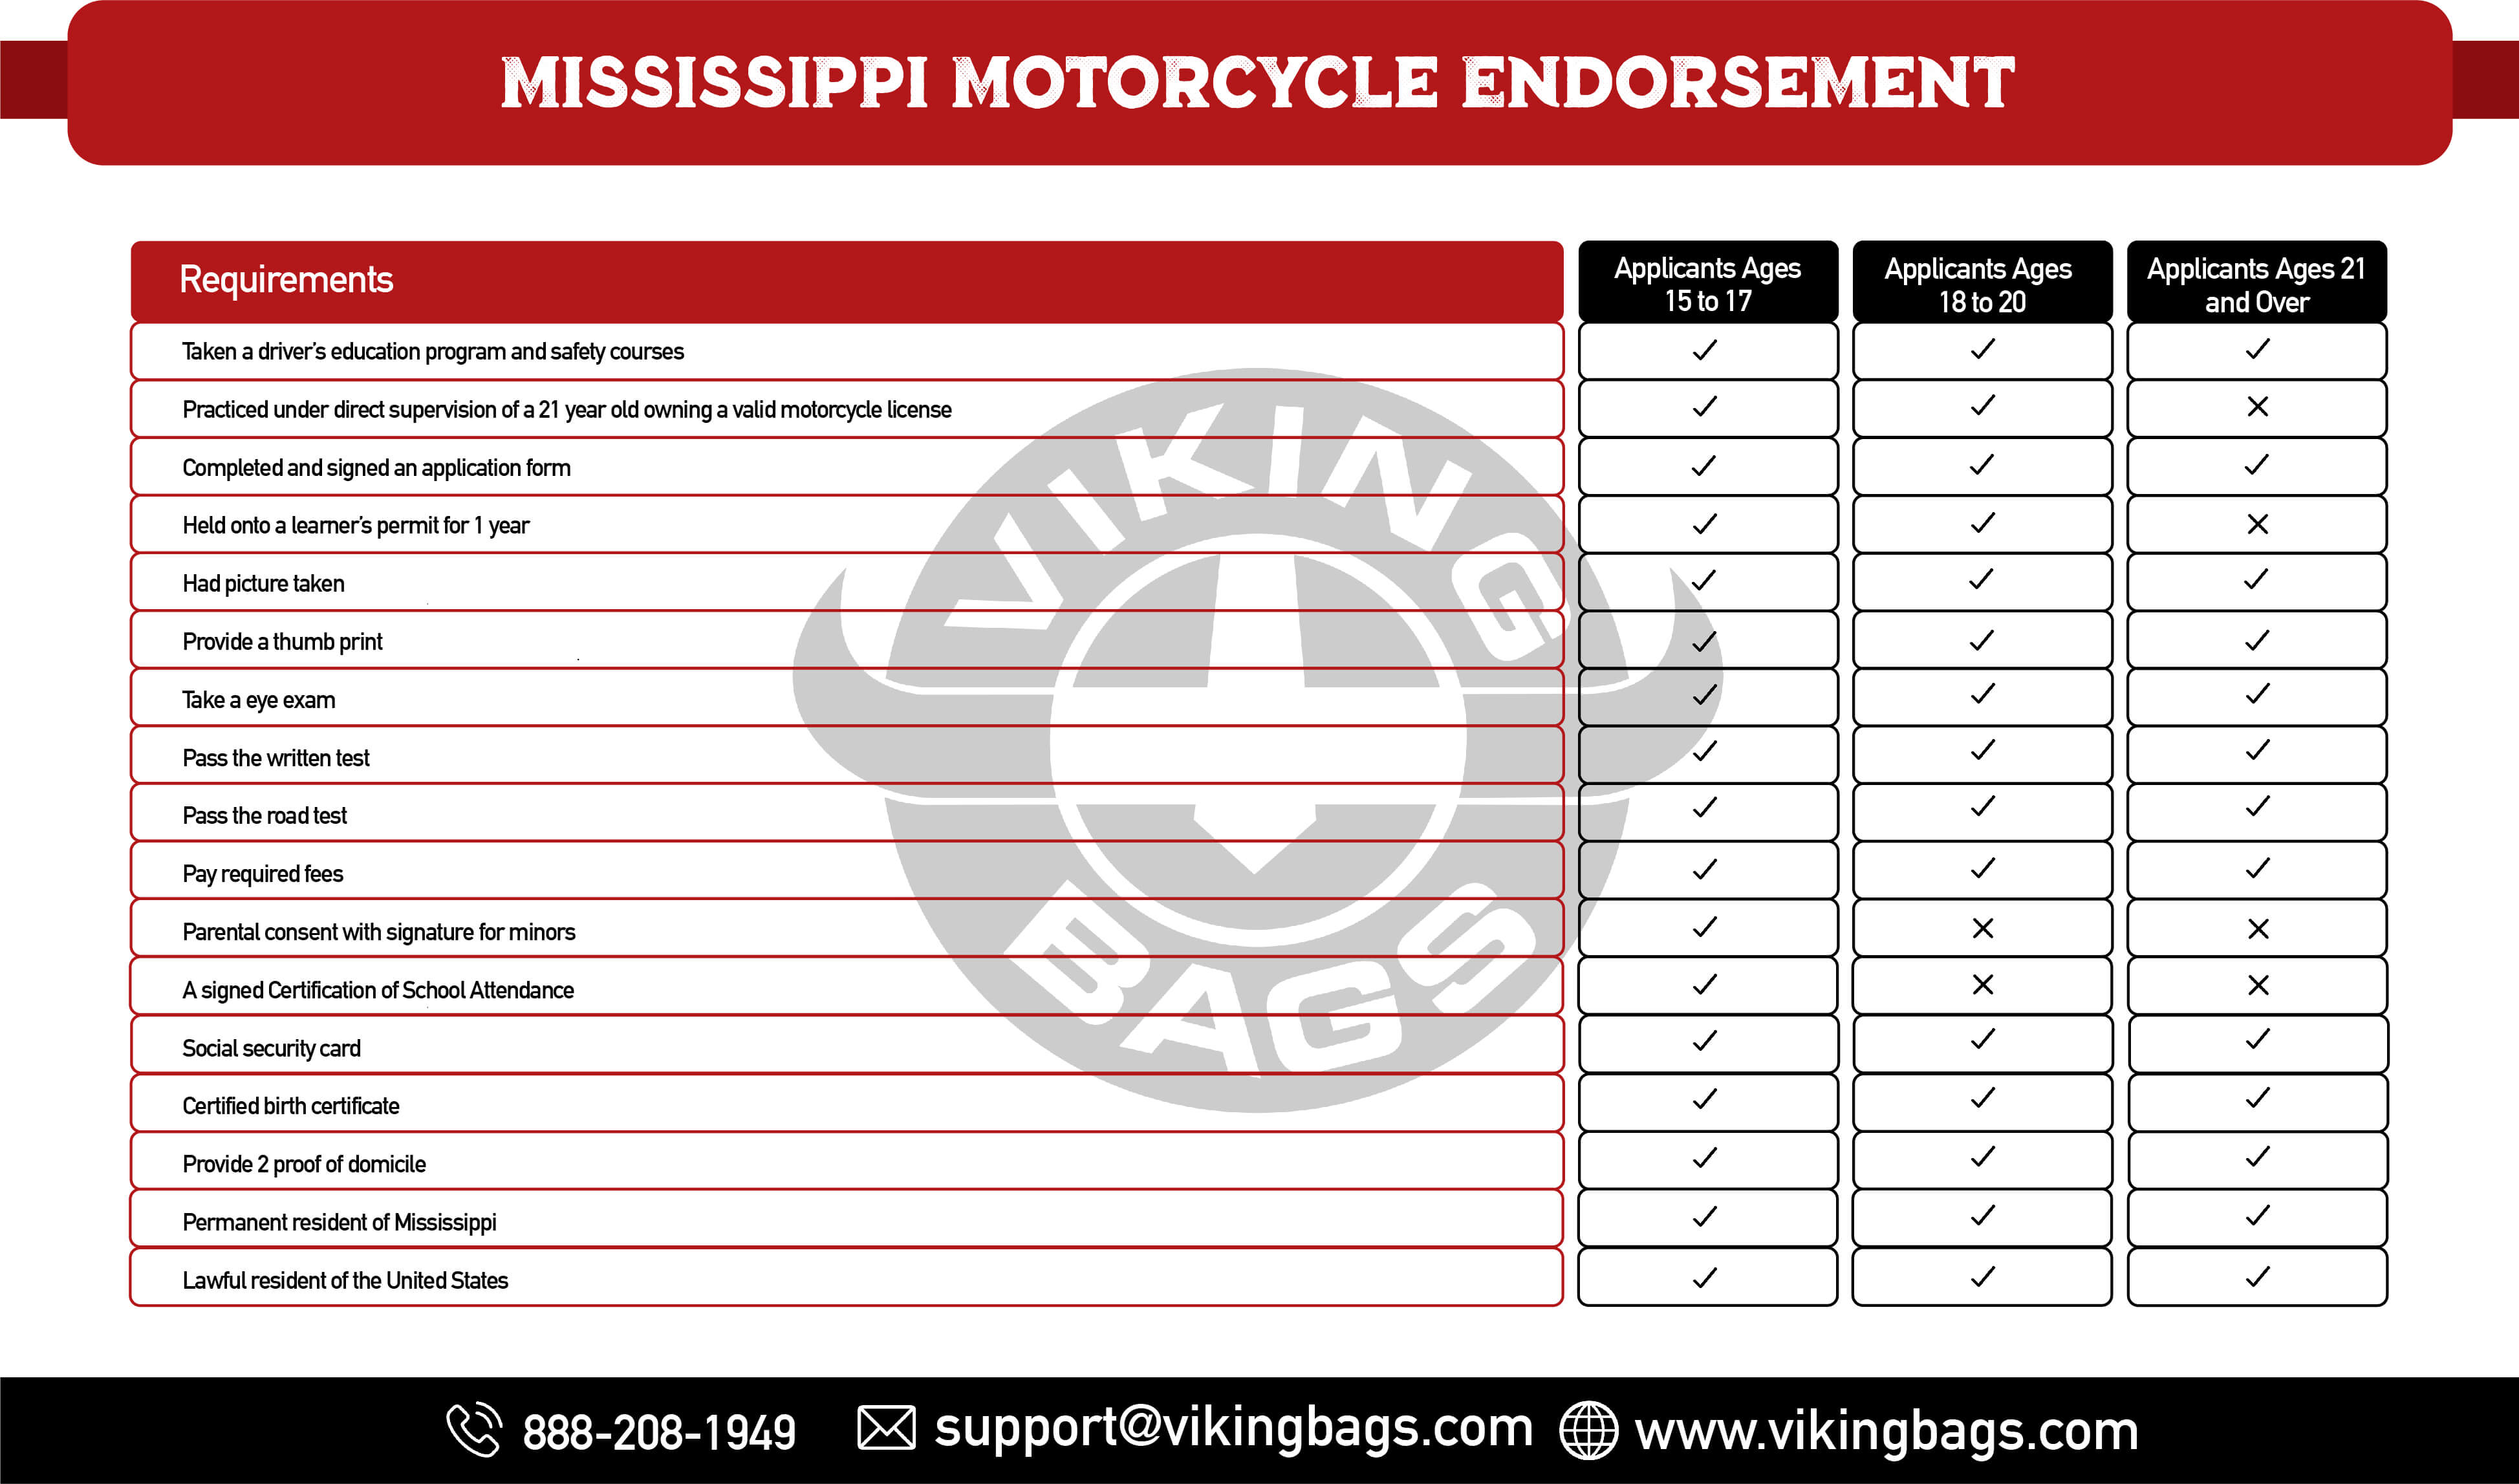 Requirements for Mississippi Motorcycle Endorsement